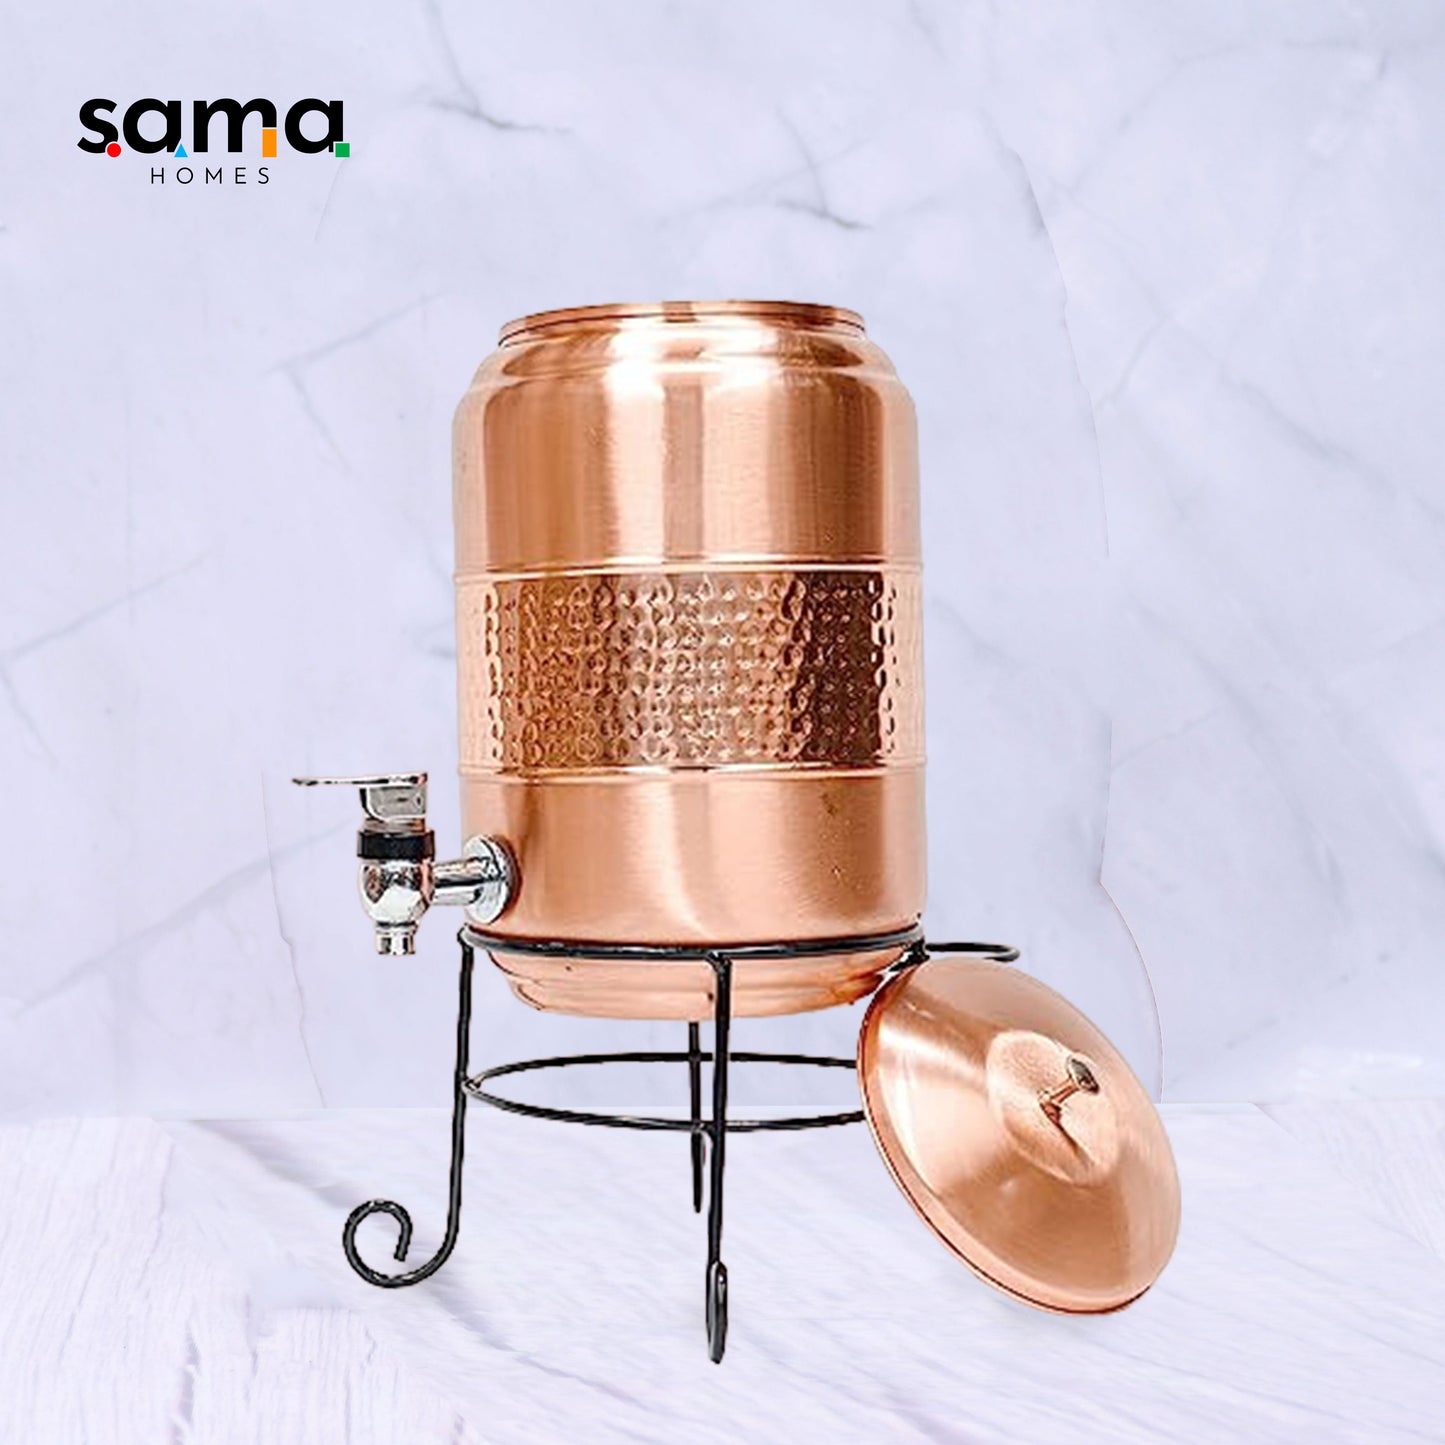 SAMA Homes - pure copper half hammered water dispenser with glass and stand matka combo 5000ml